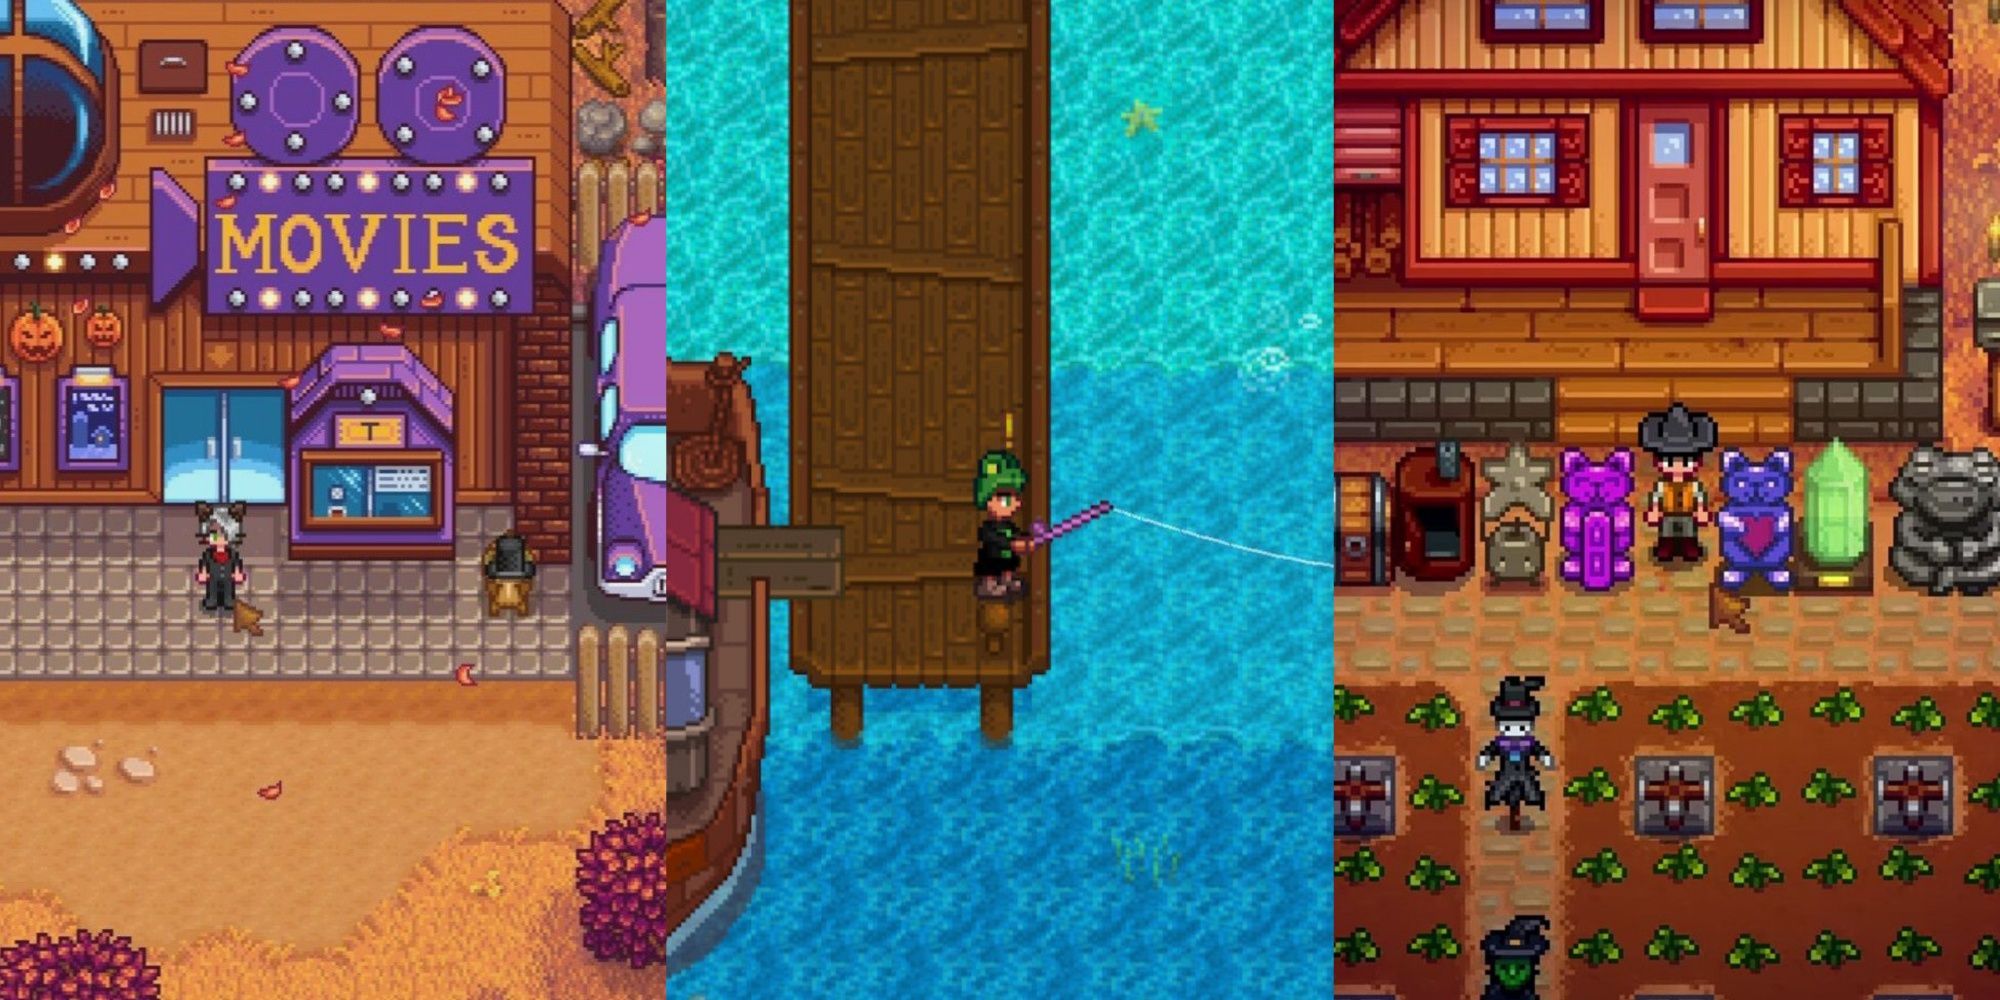 Stardew Valley just hit a new player count record